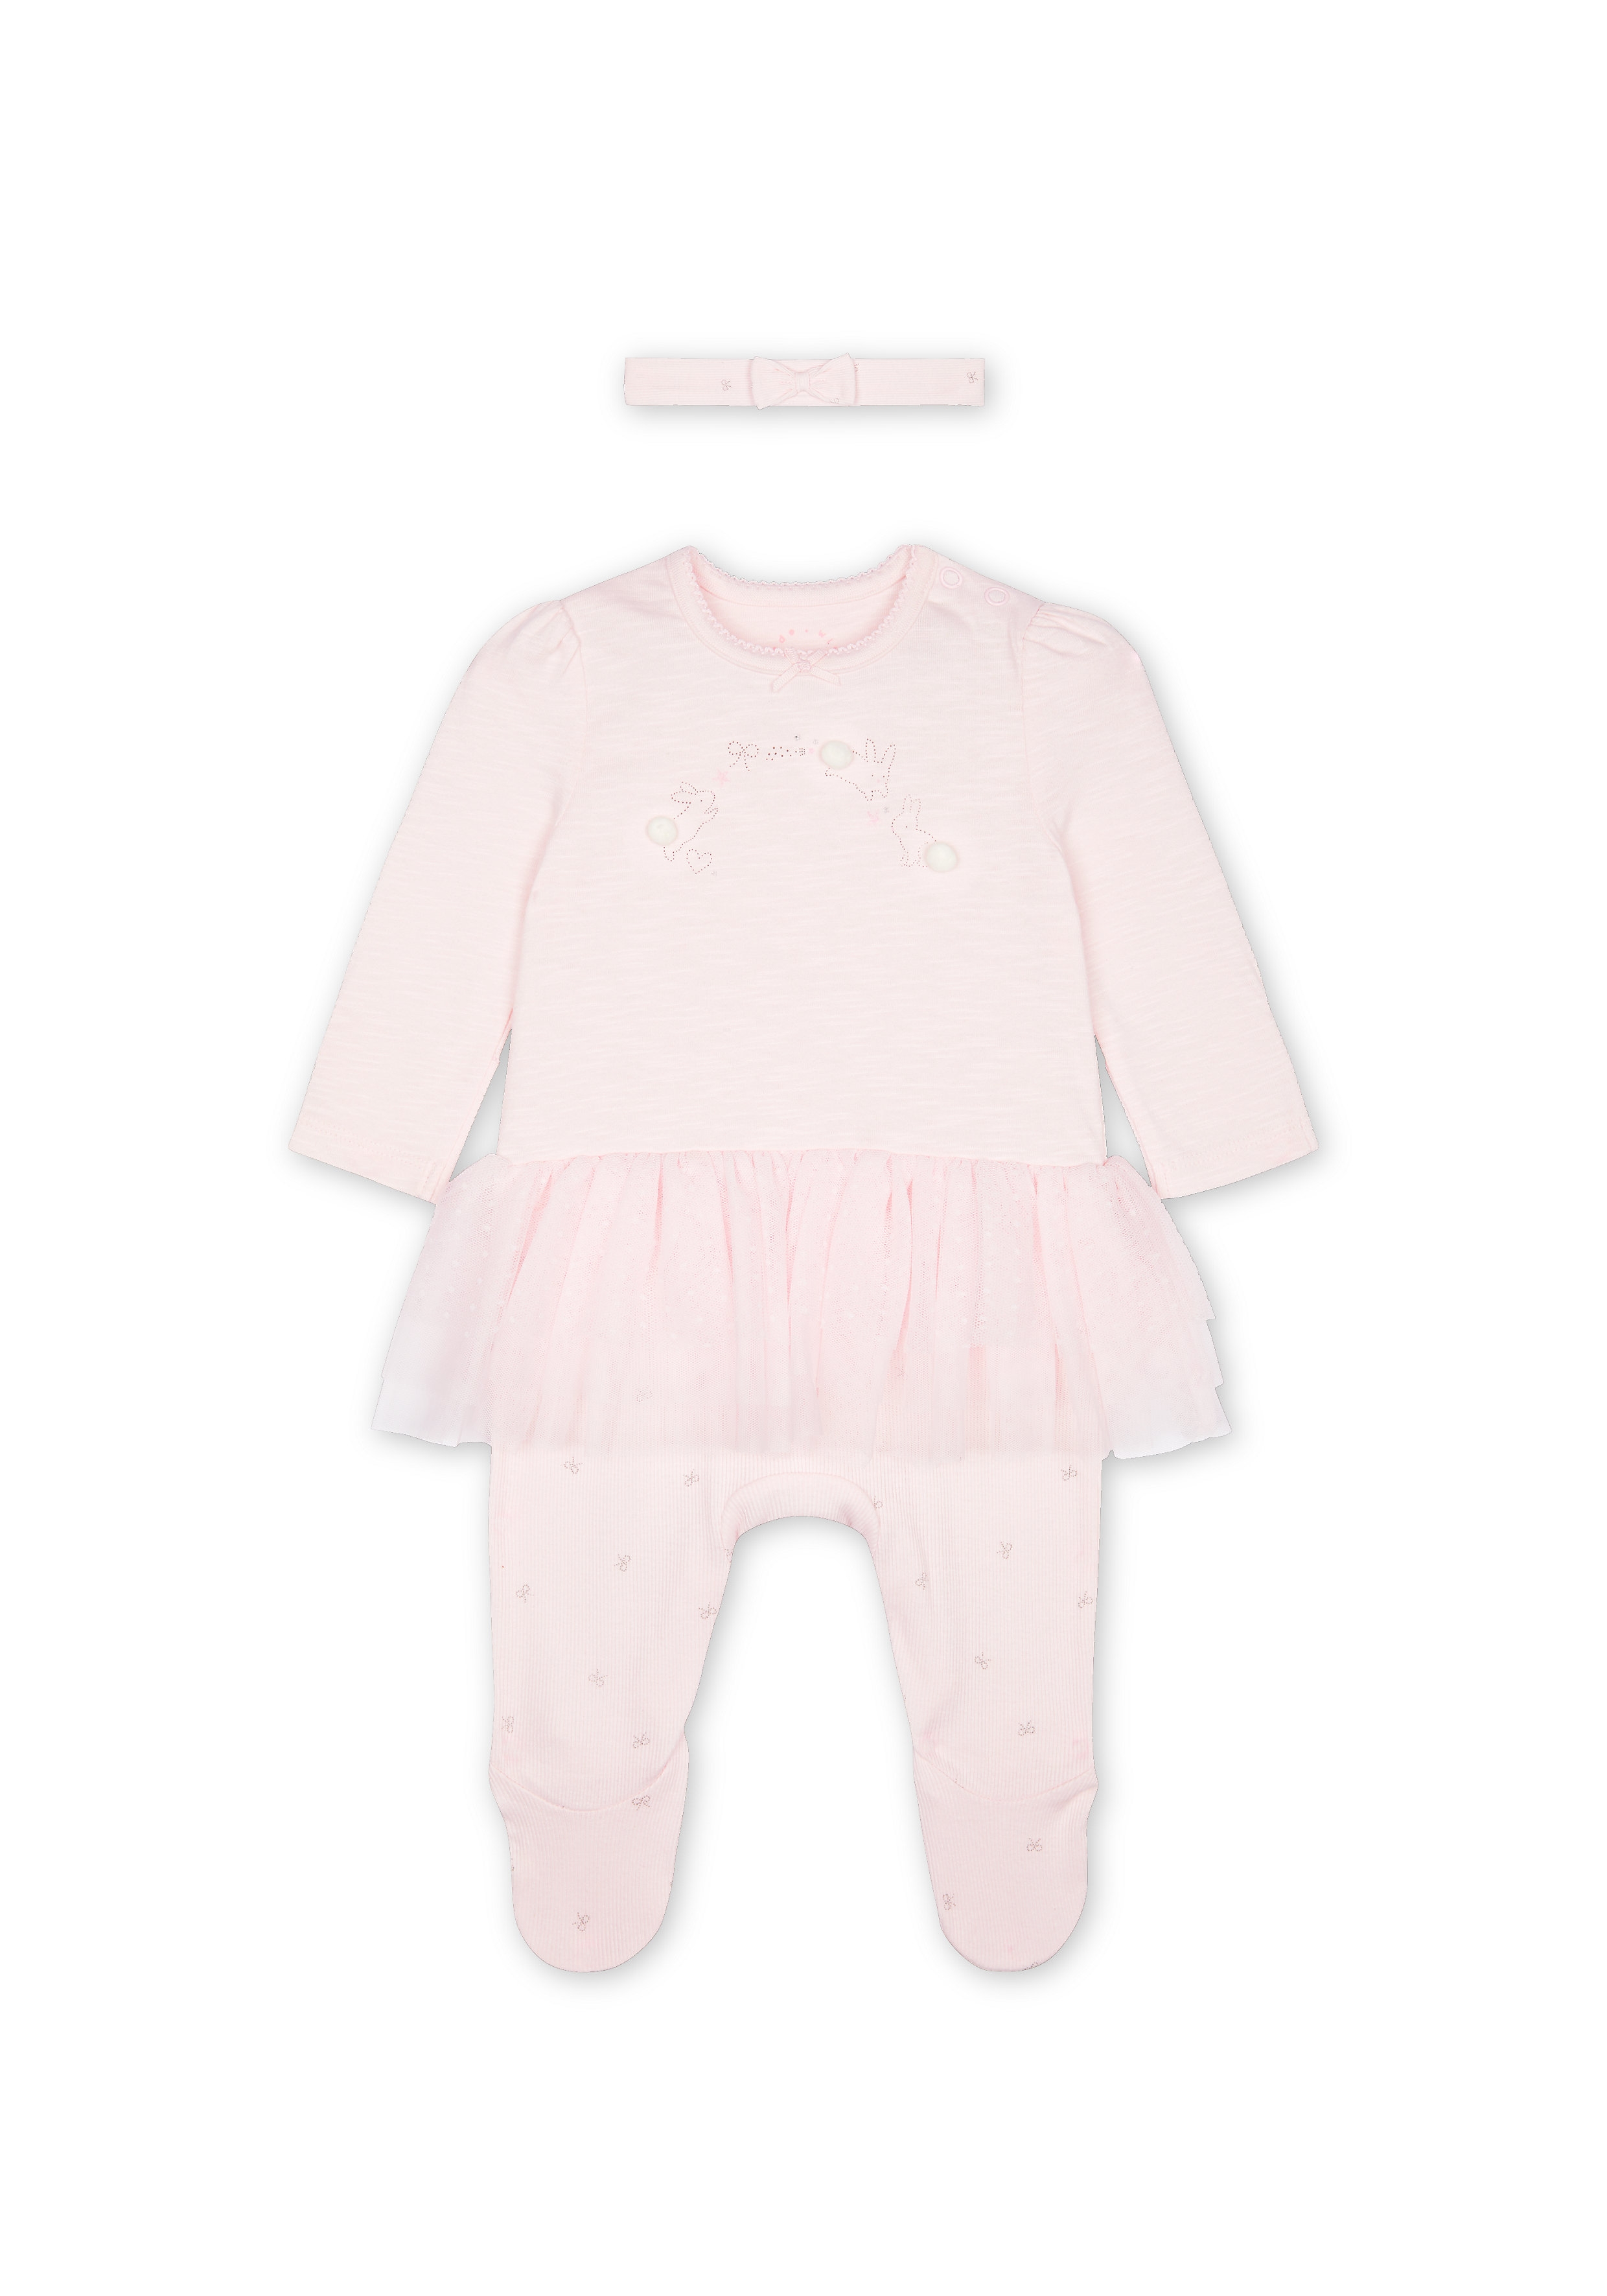 Girls Full Sleeves Frill Romper With Headband - Pink